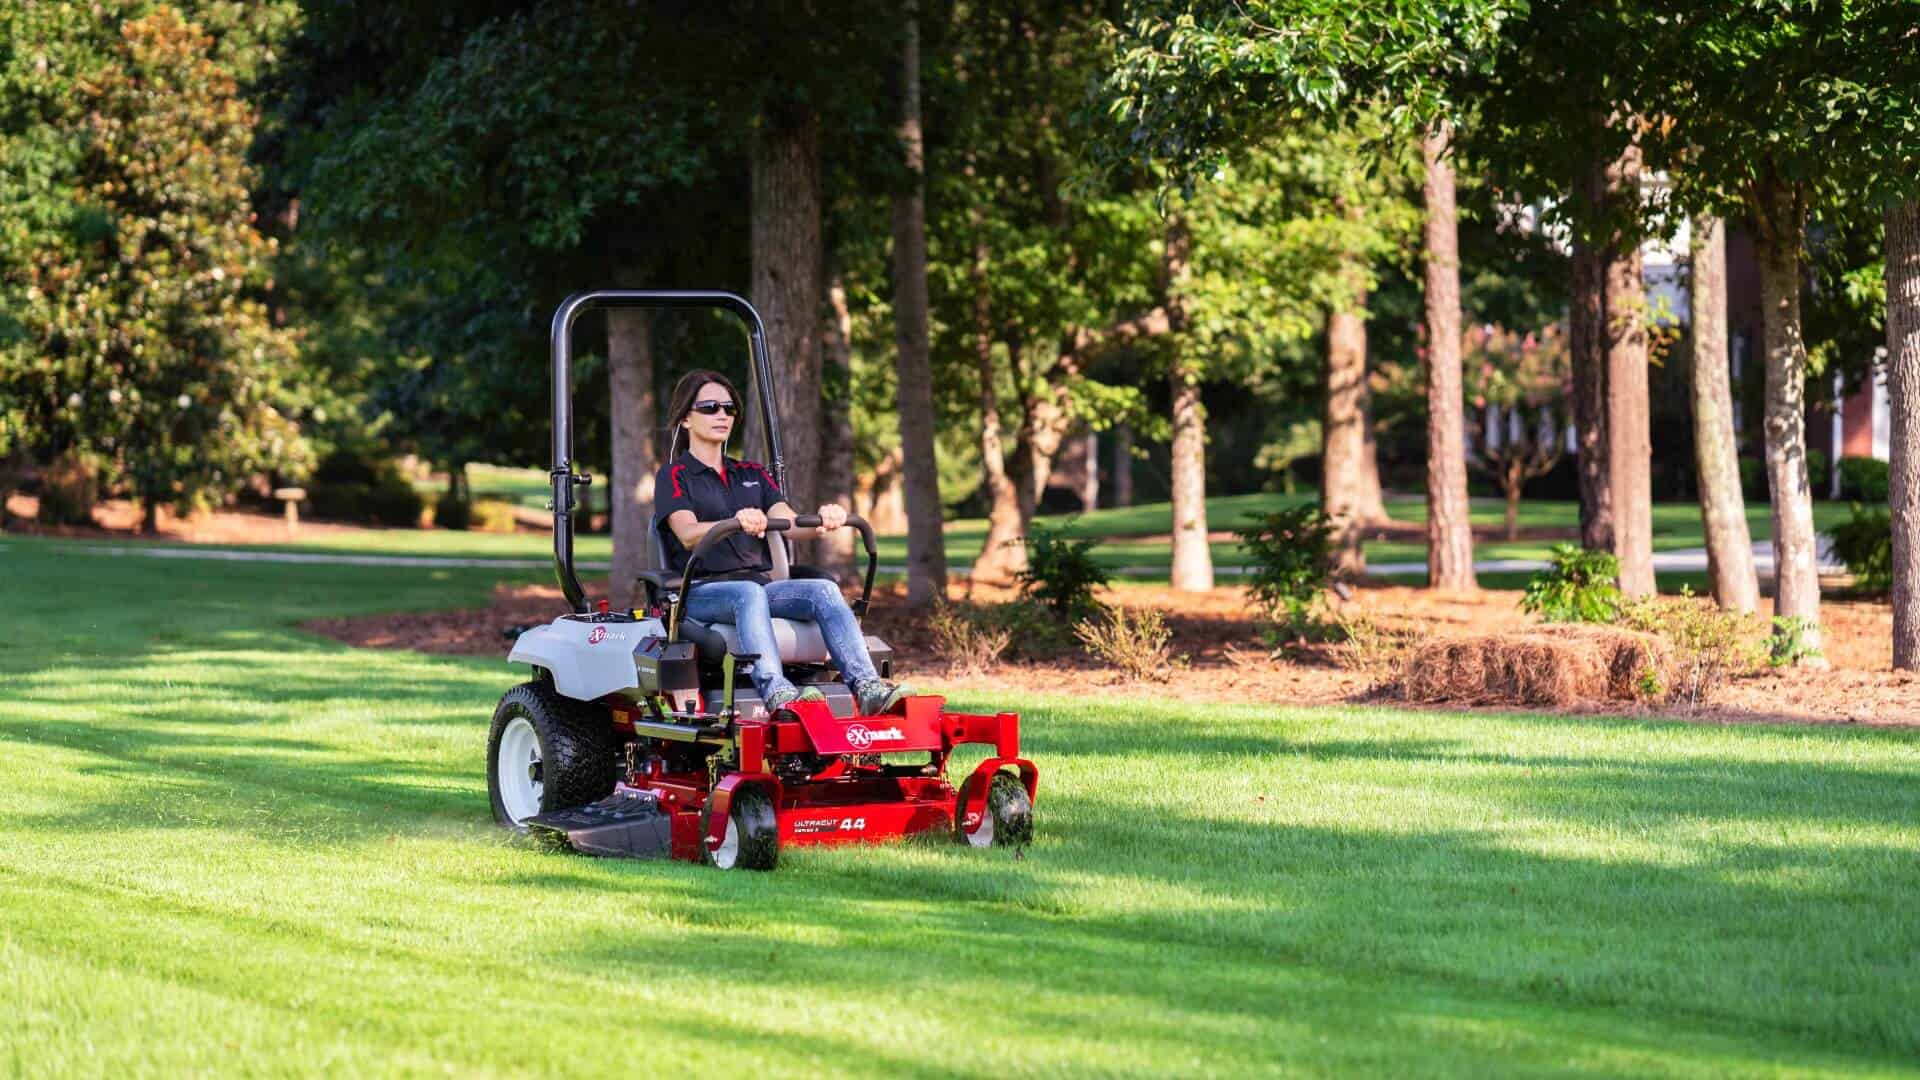 Good design means landscaping makes mowing easier